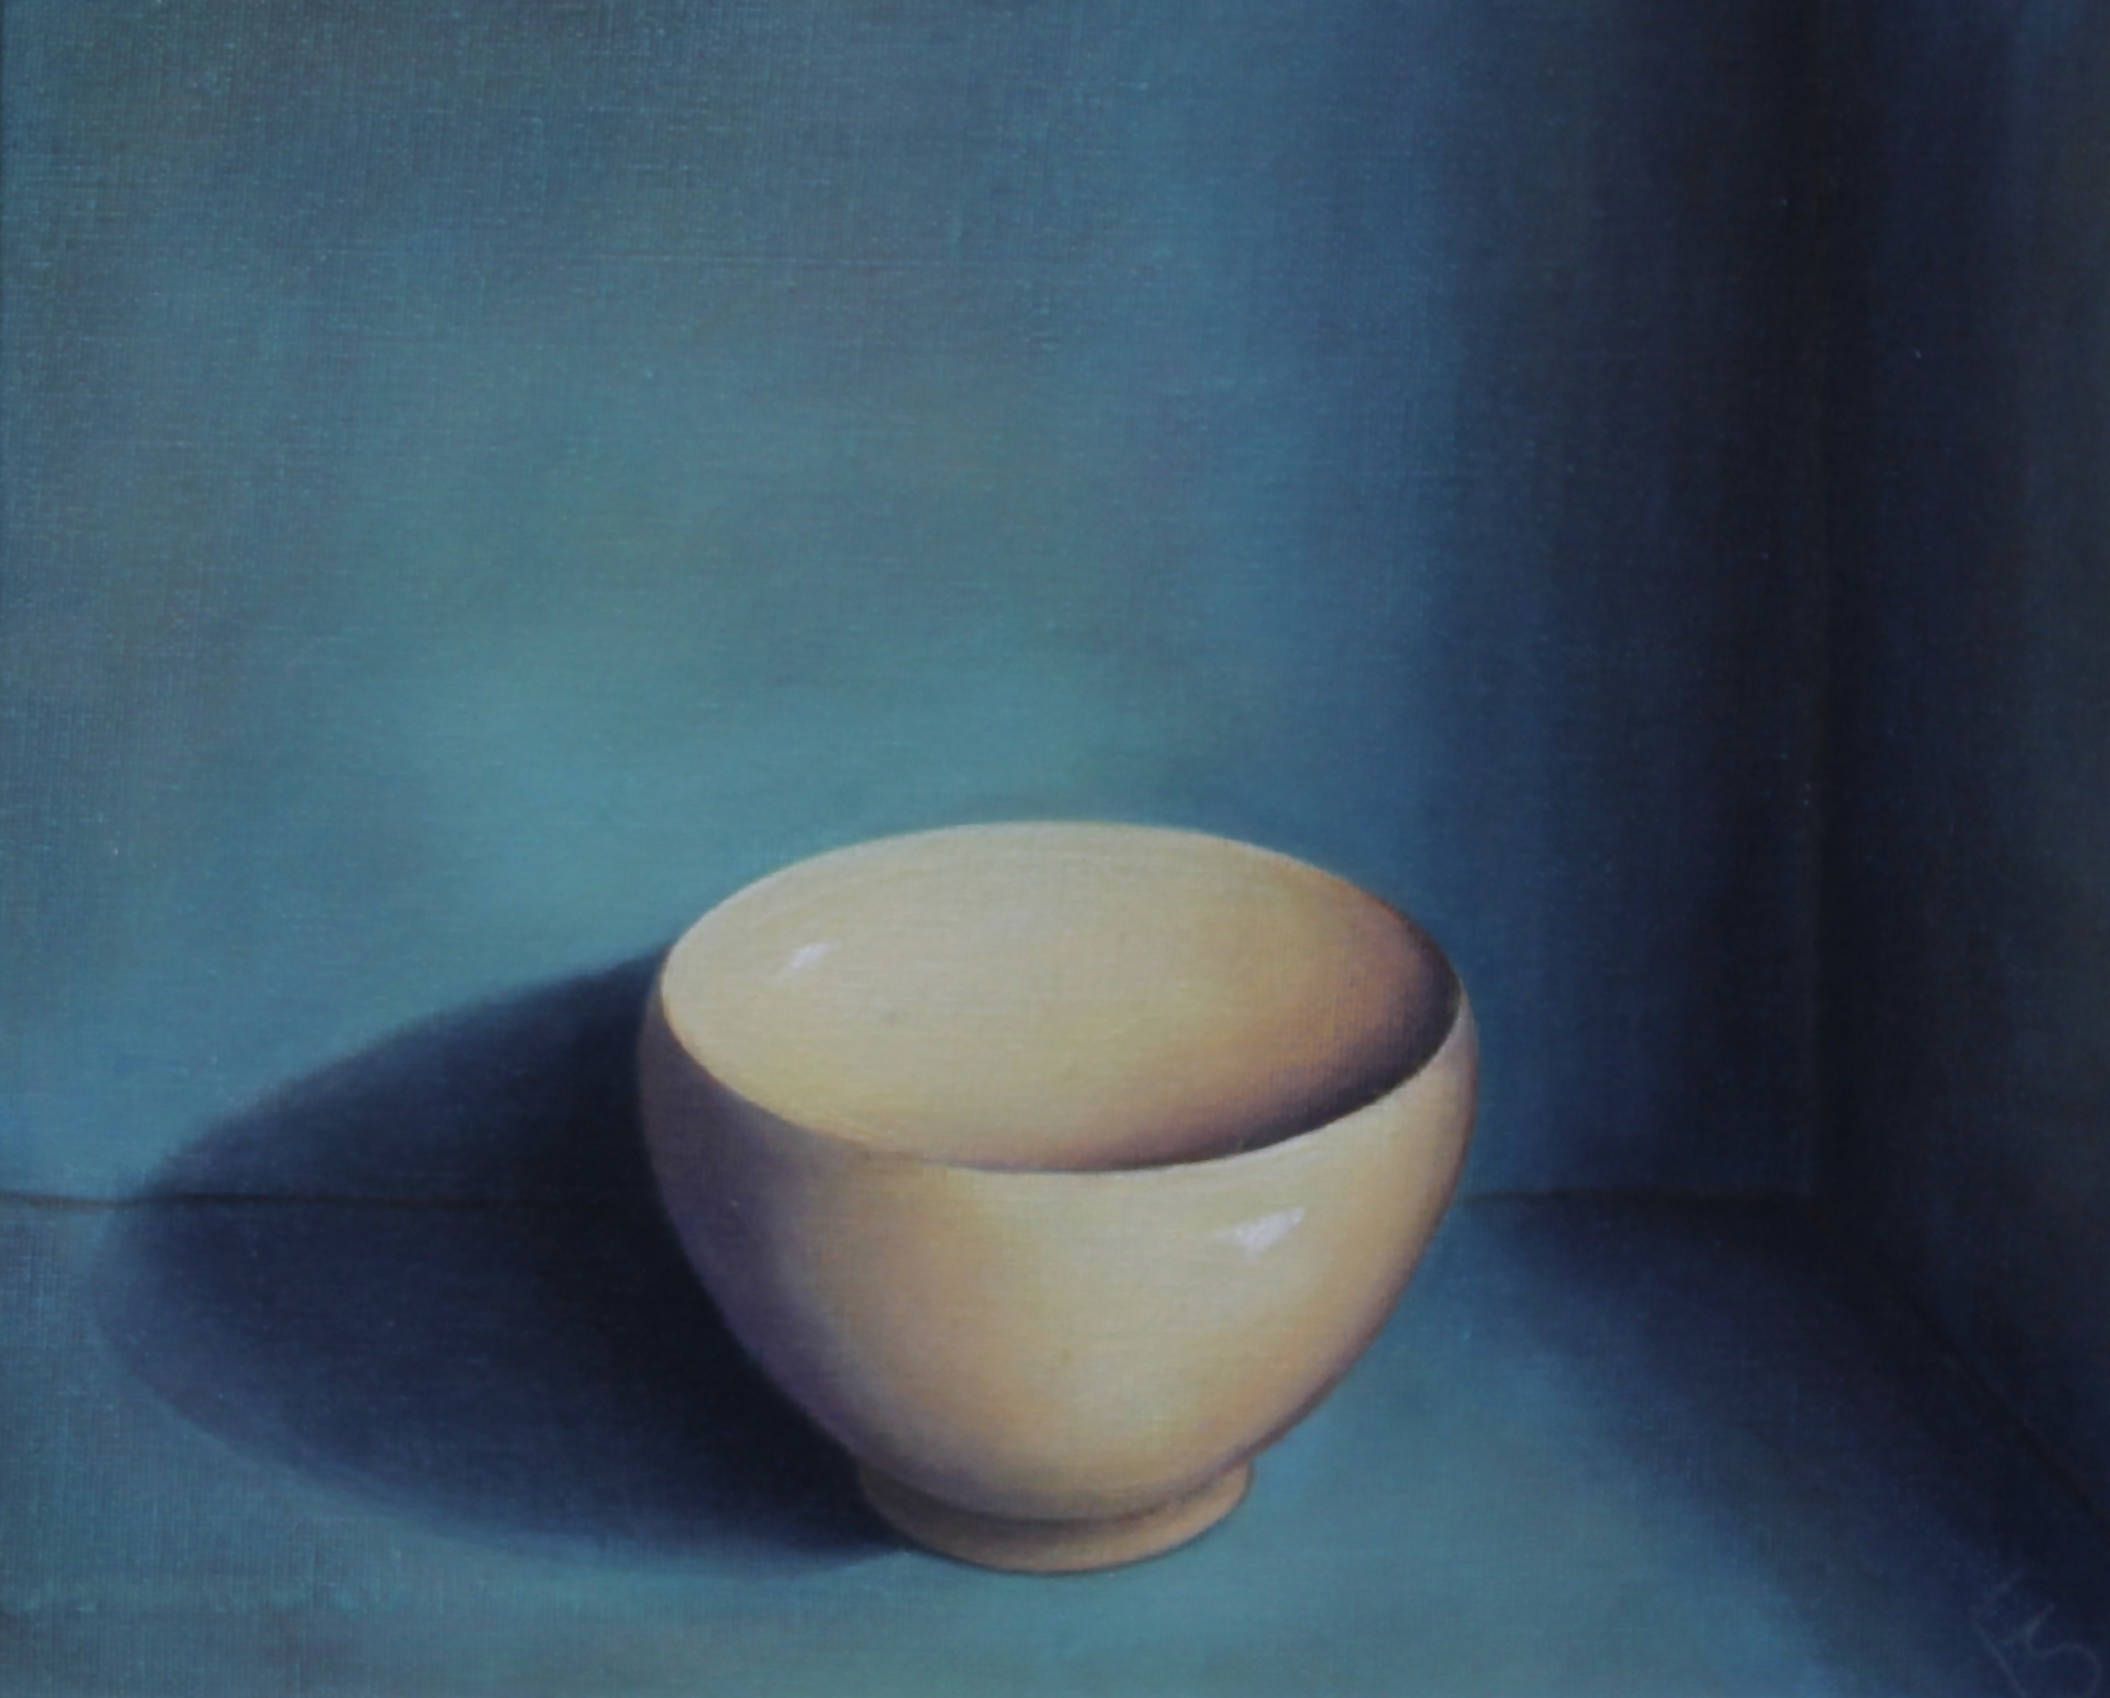 Fiona Smith "Offering Bowl 2" by Fiona Smith